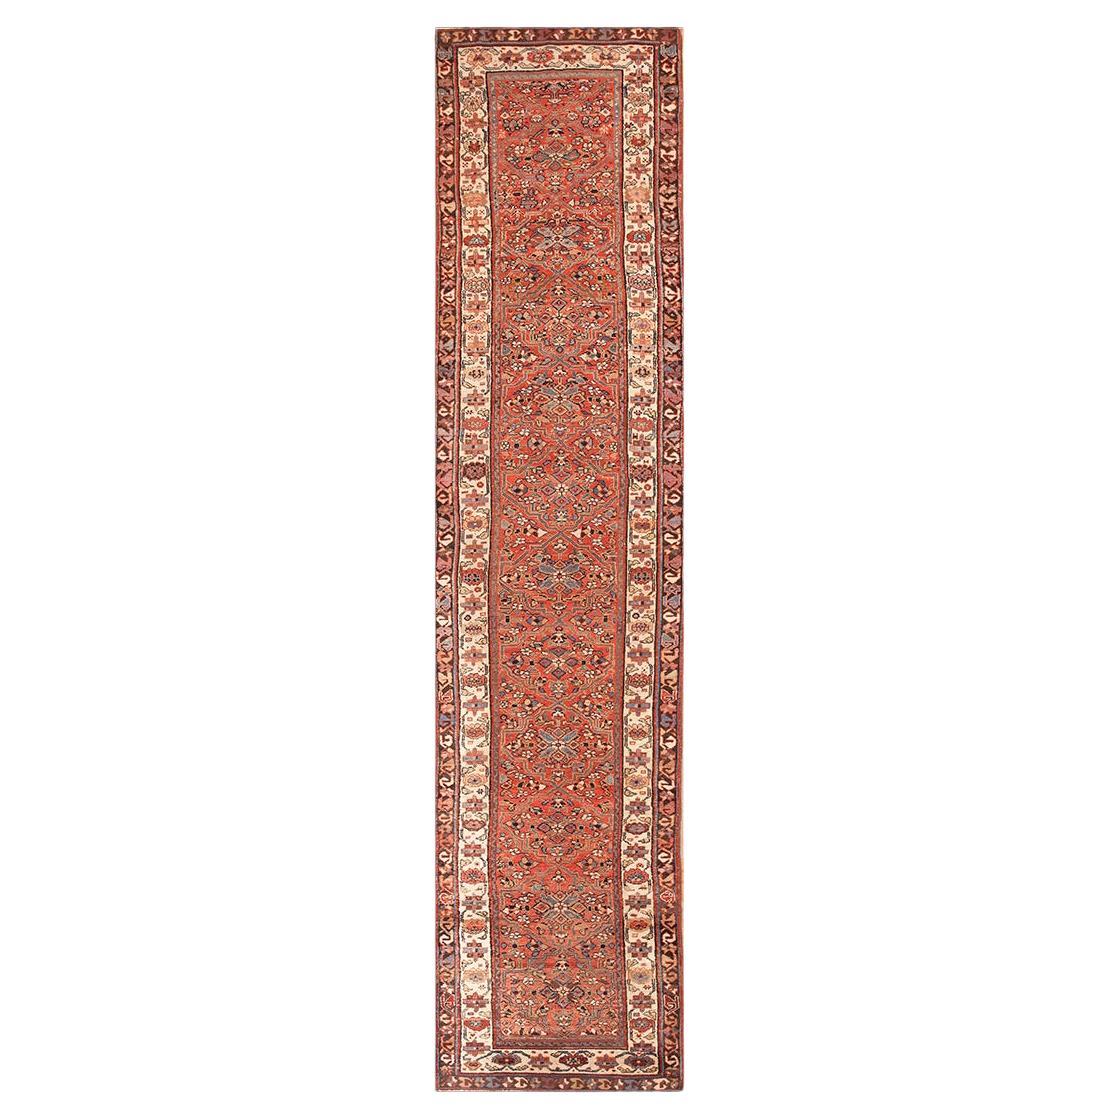 Mid 19th Century N.W. Persian Carpet ( 3'4" x 13'10" - 102 x 422 ) For Sale